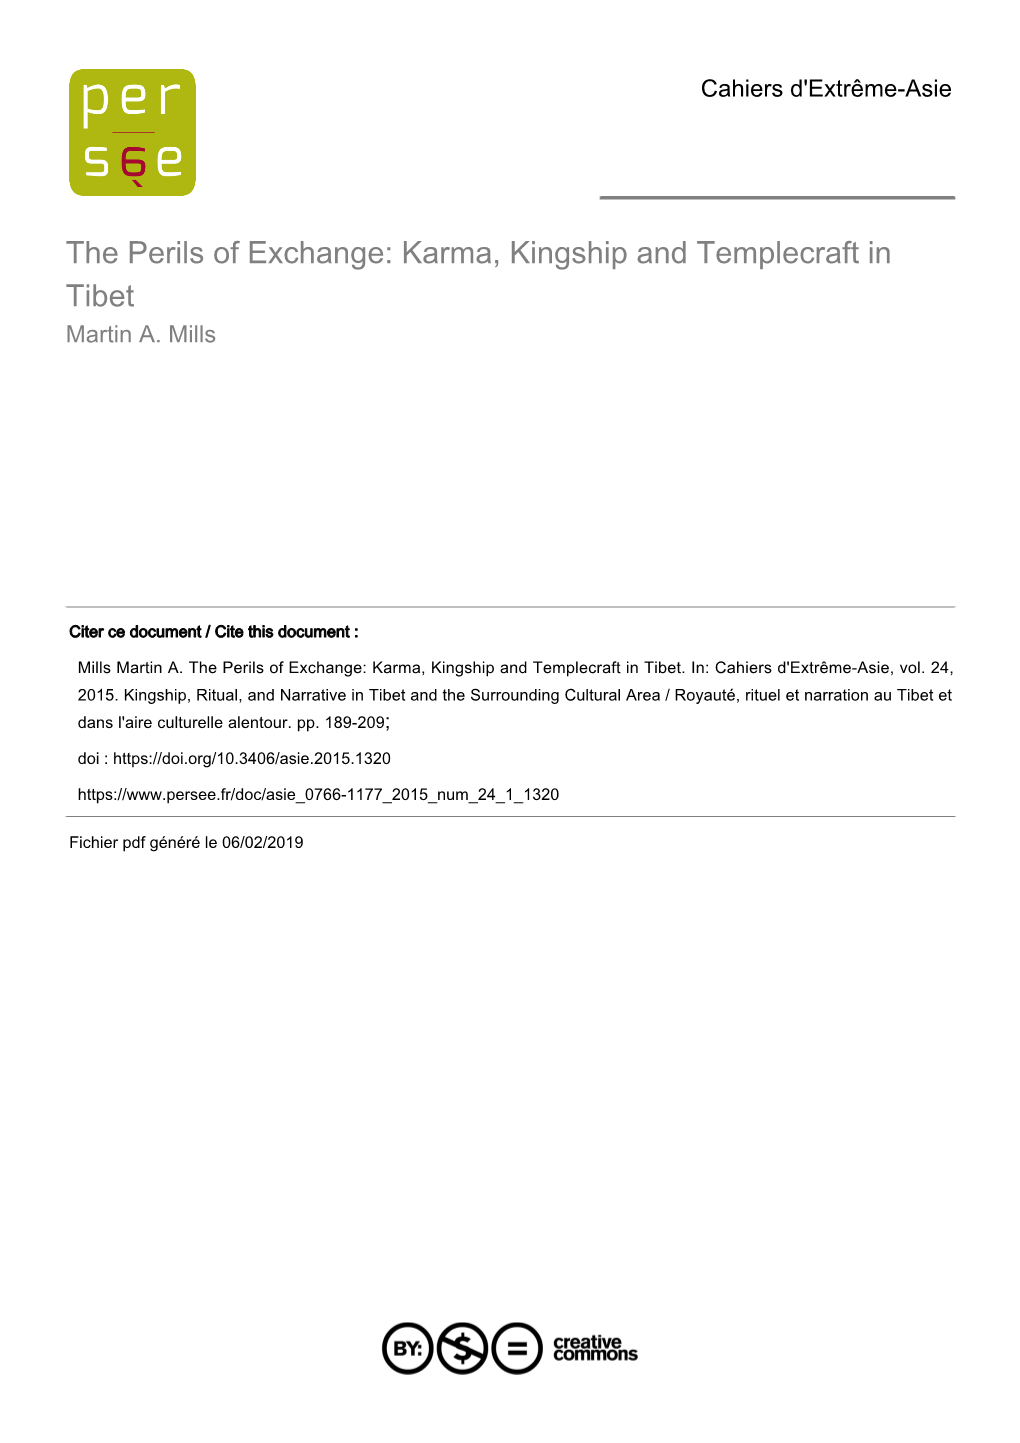 The Perils of Exchange: Karma, Kingship and Templecraft in Tibet Martin A